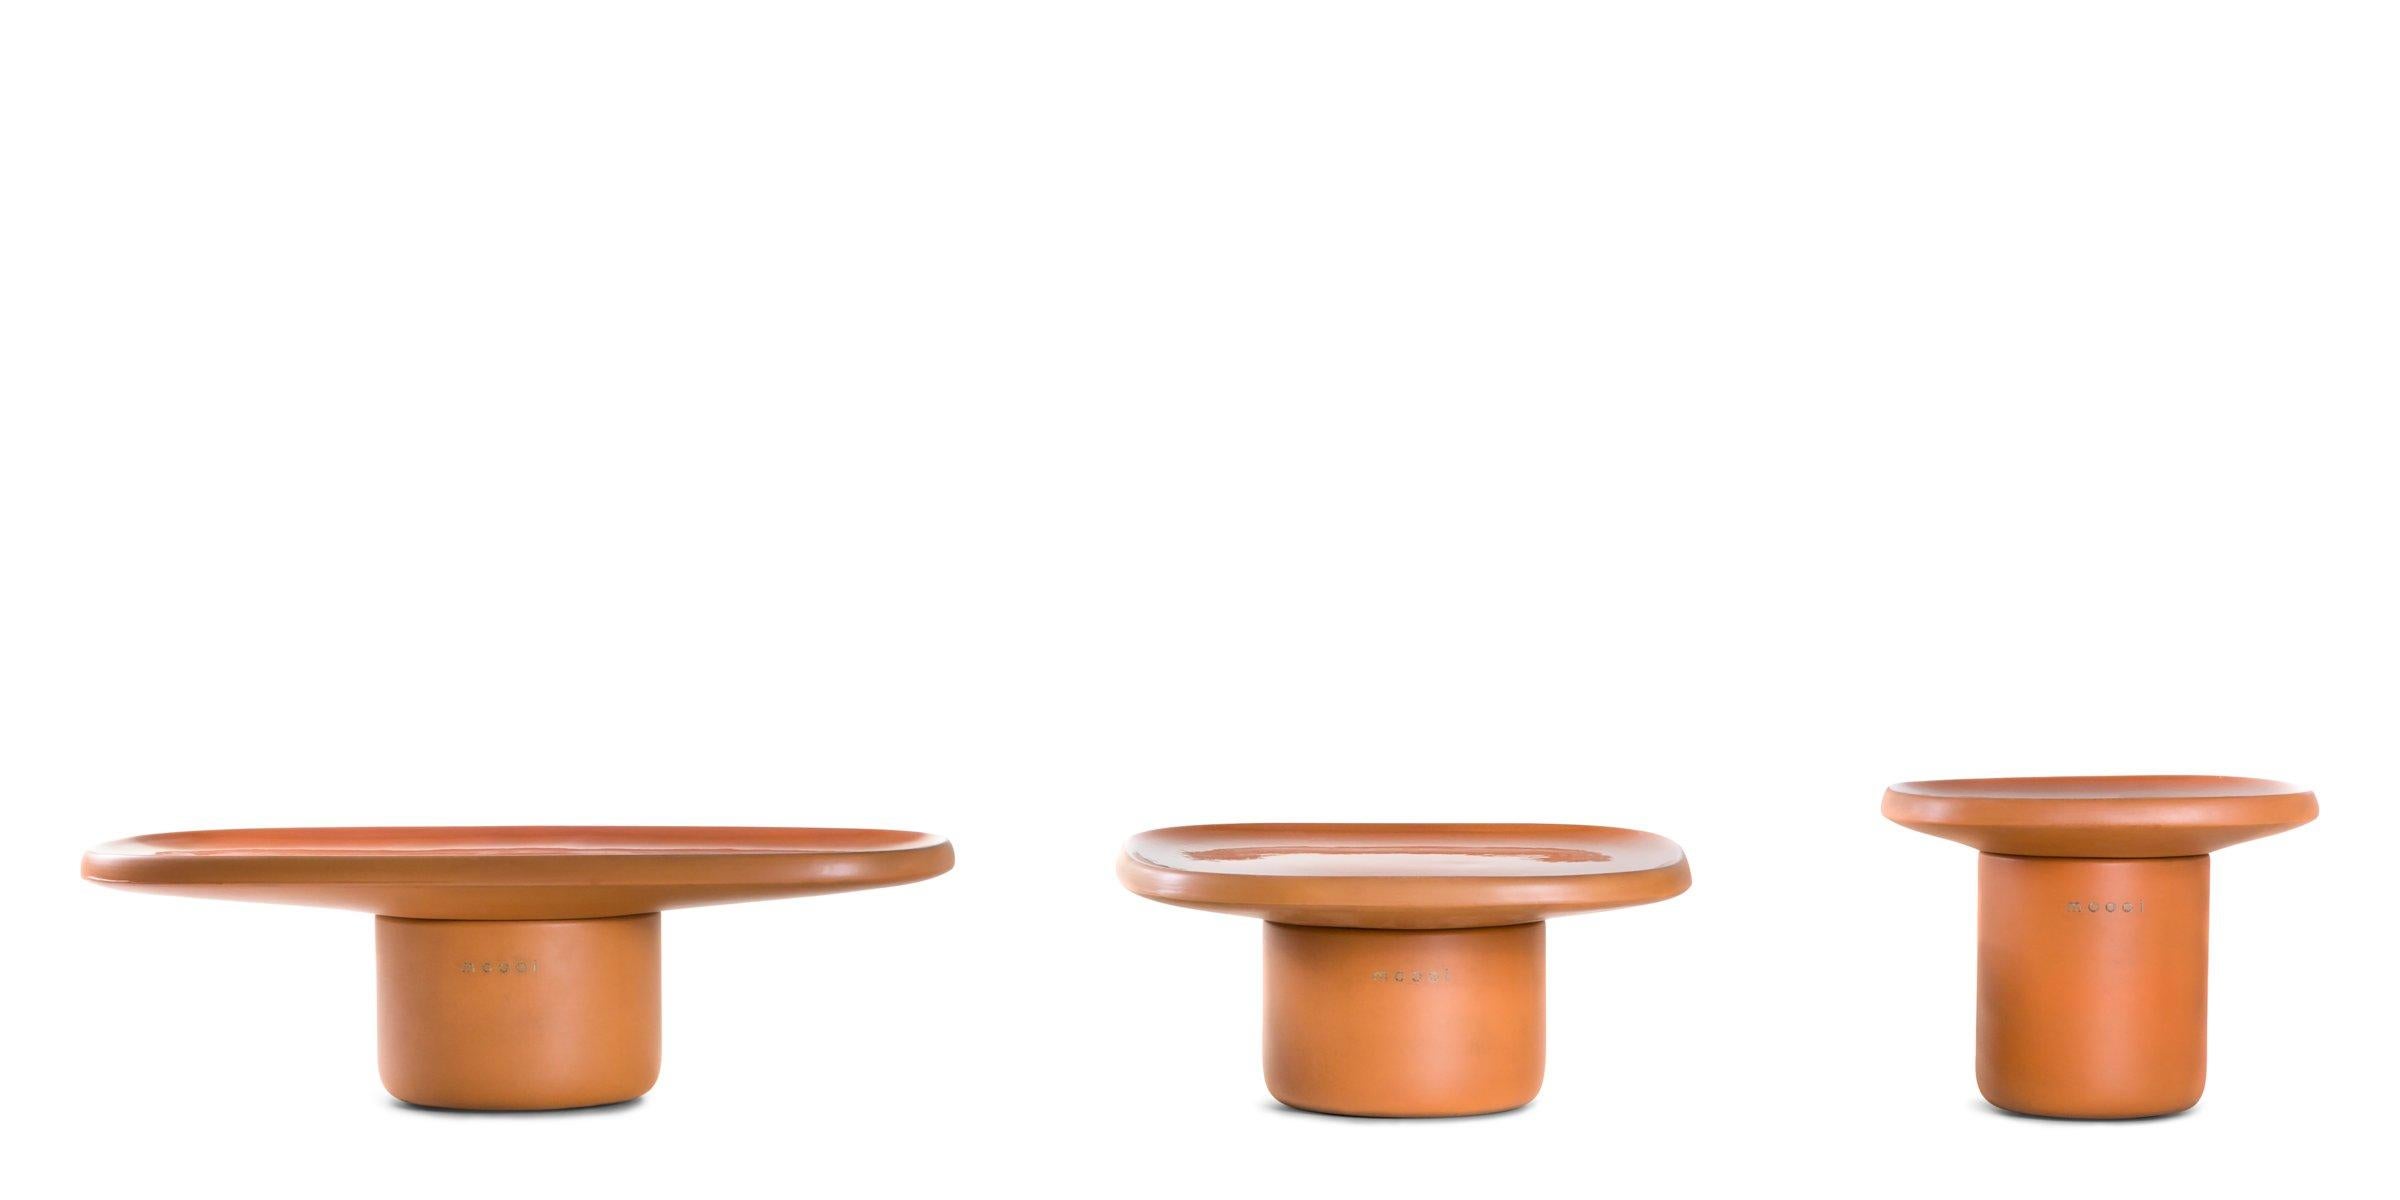 Obon is a collection of three tables inspired by an ancient, earthy, irregular material: terra-cotta. With its origins lost in the mists of time, terracotta is at the base of millenary archaeological finds all over the world. These precious